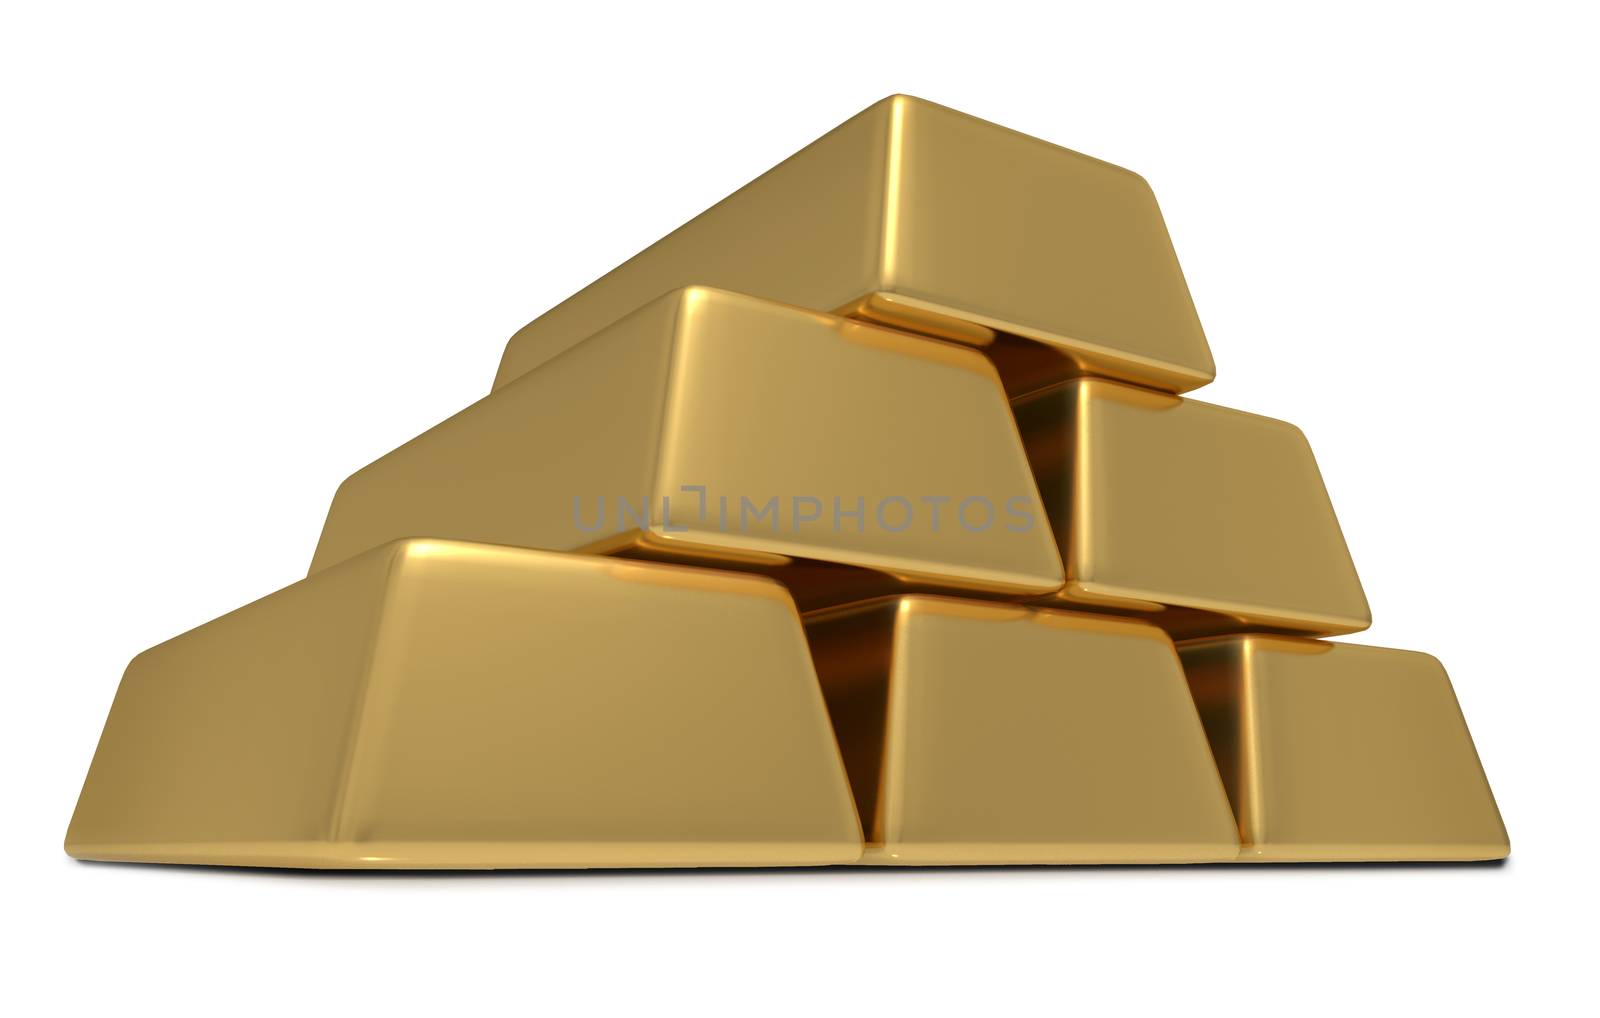 3D illustration of six gold bullion bars representing enormous weath or assets